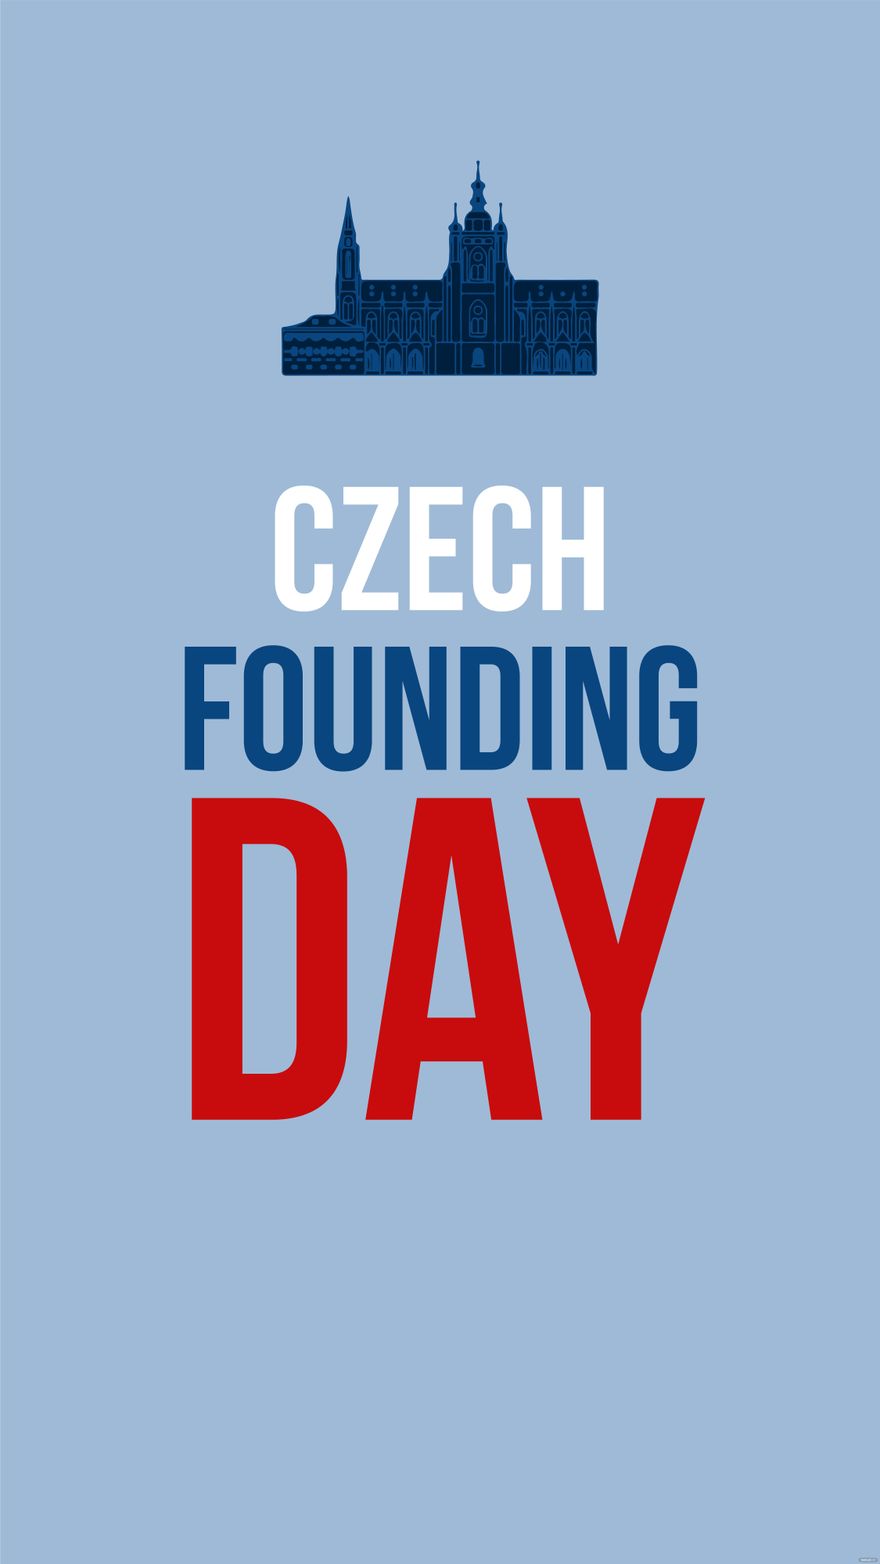 Free Czech Founding Day iPhone Background in PDF, Illustrator, PSD, EPS, SVG, JPG, PNG